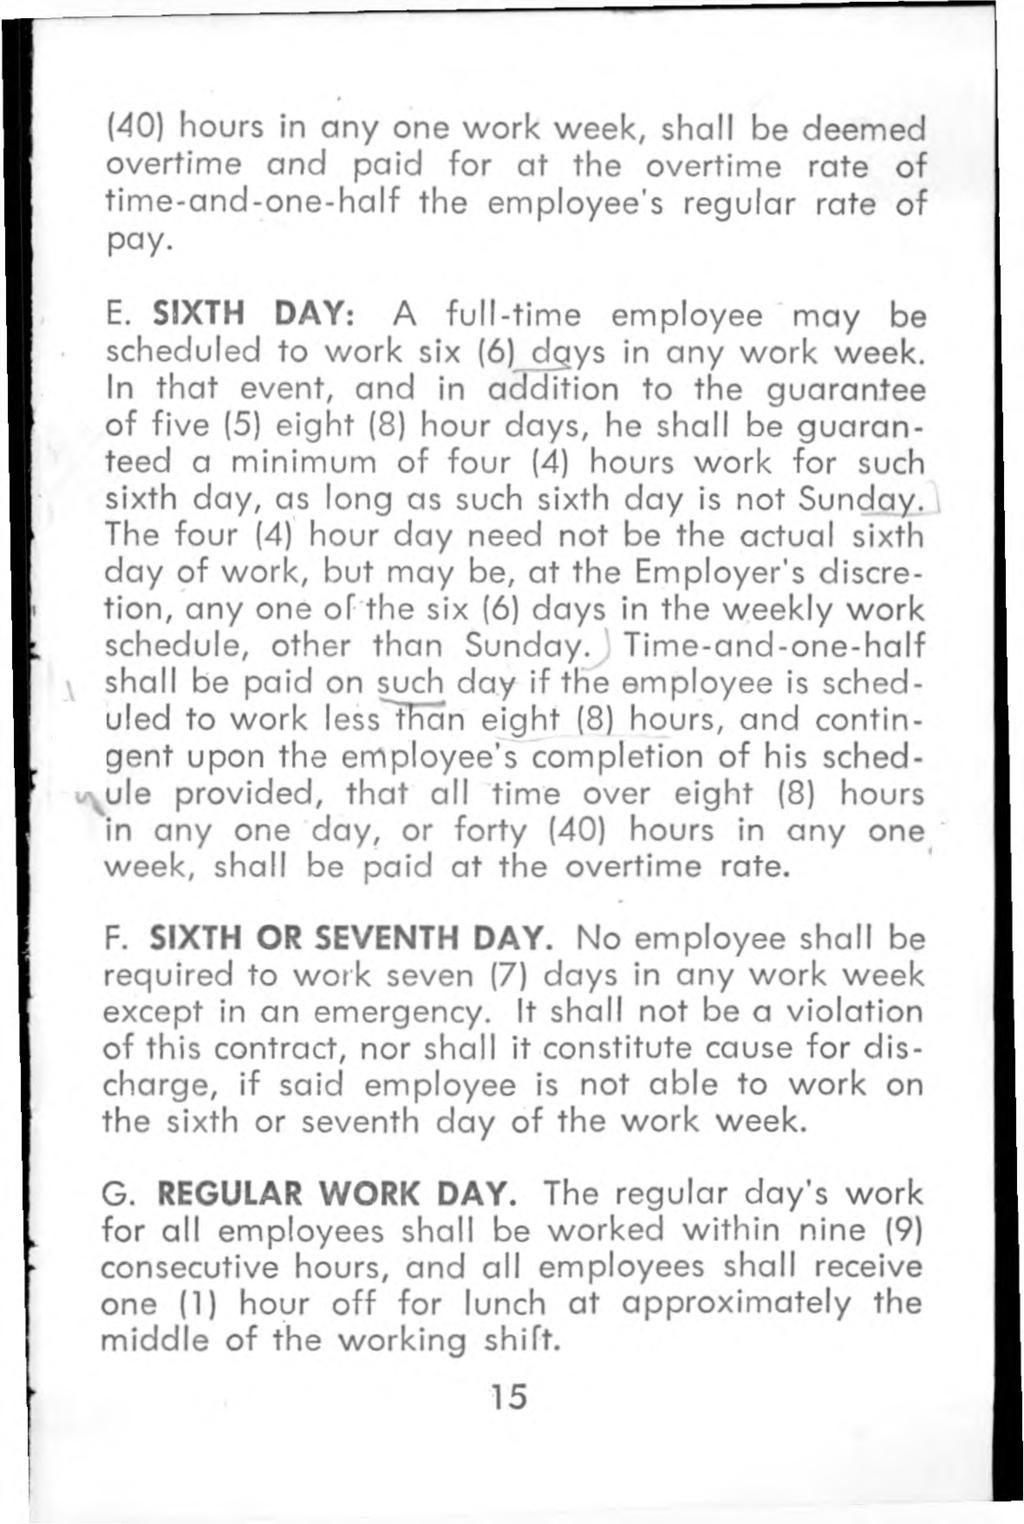 (40) hours in any one w ork week, shall be deemed overtime and paid for at the overtime rate o f tim e-a n d -o n e -h a lf the employee's regular rate o f pay. E.